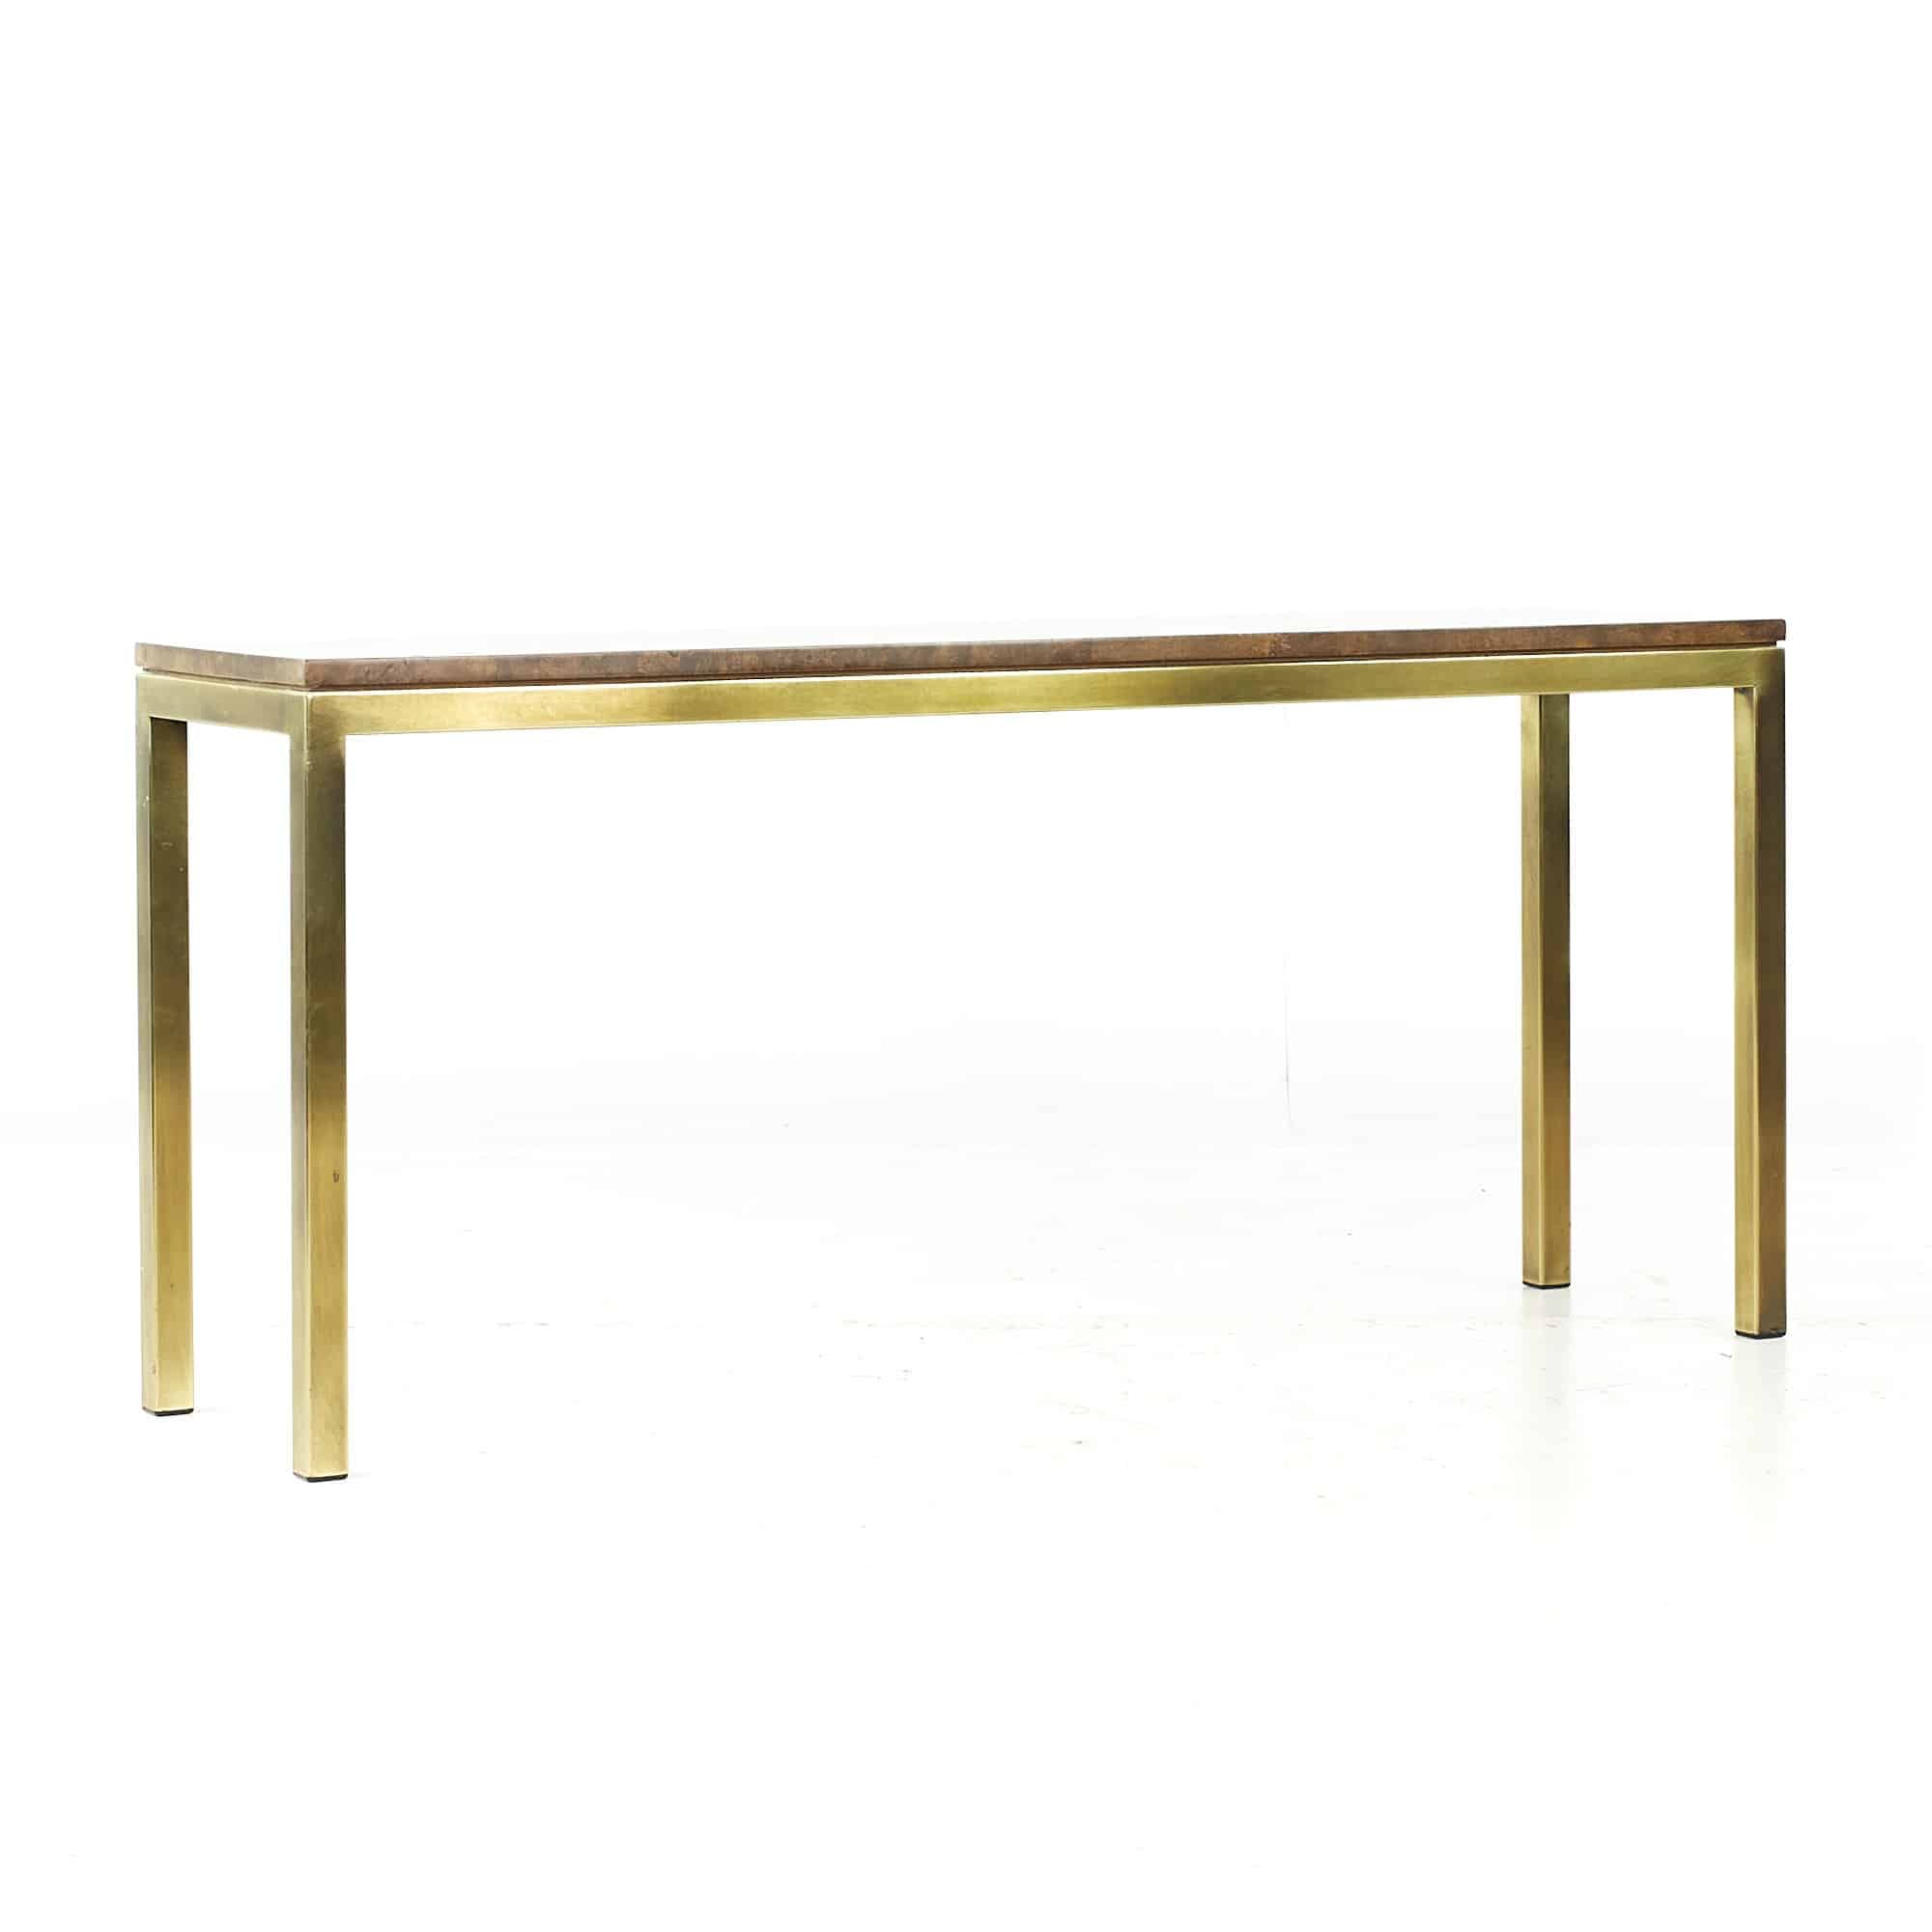 Tomlinson Mid Century Burlwood and Brass Console Table